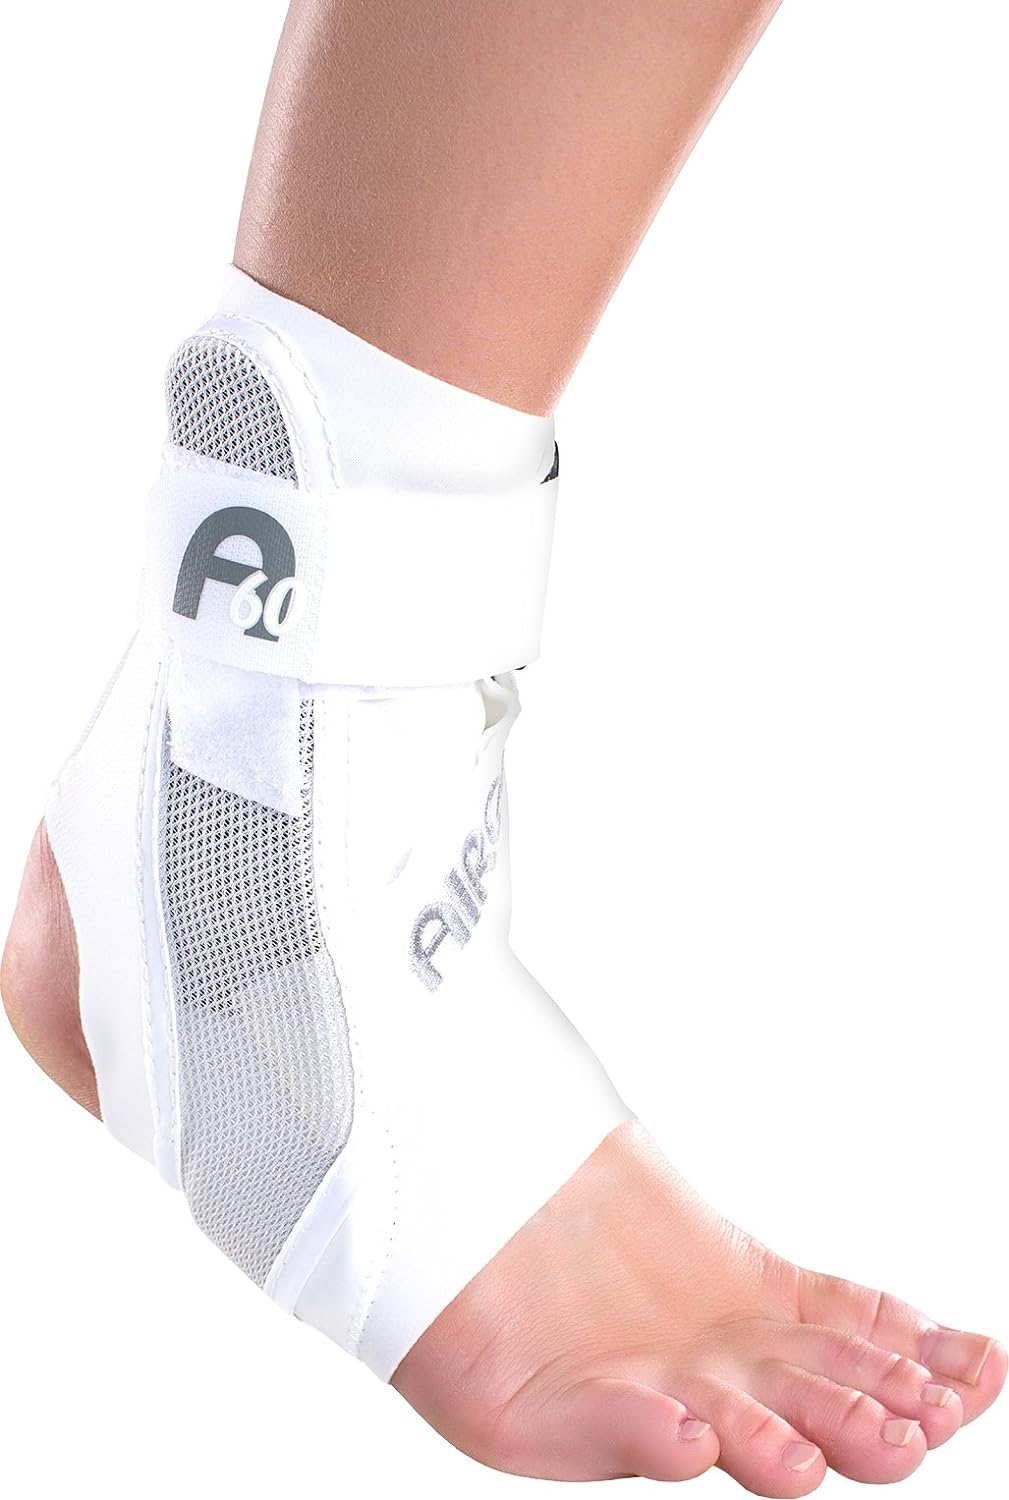 Featured Image for Aircast A60 Ankle Support Brace, Right Foot, White, Medium (Shoe Size: Men’s 7.5-11.5 / Women’s 9-13)